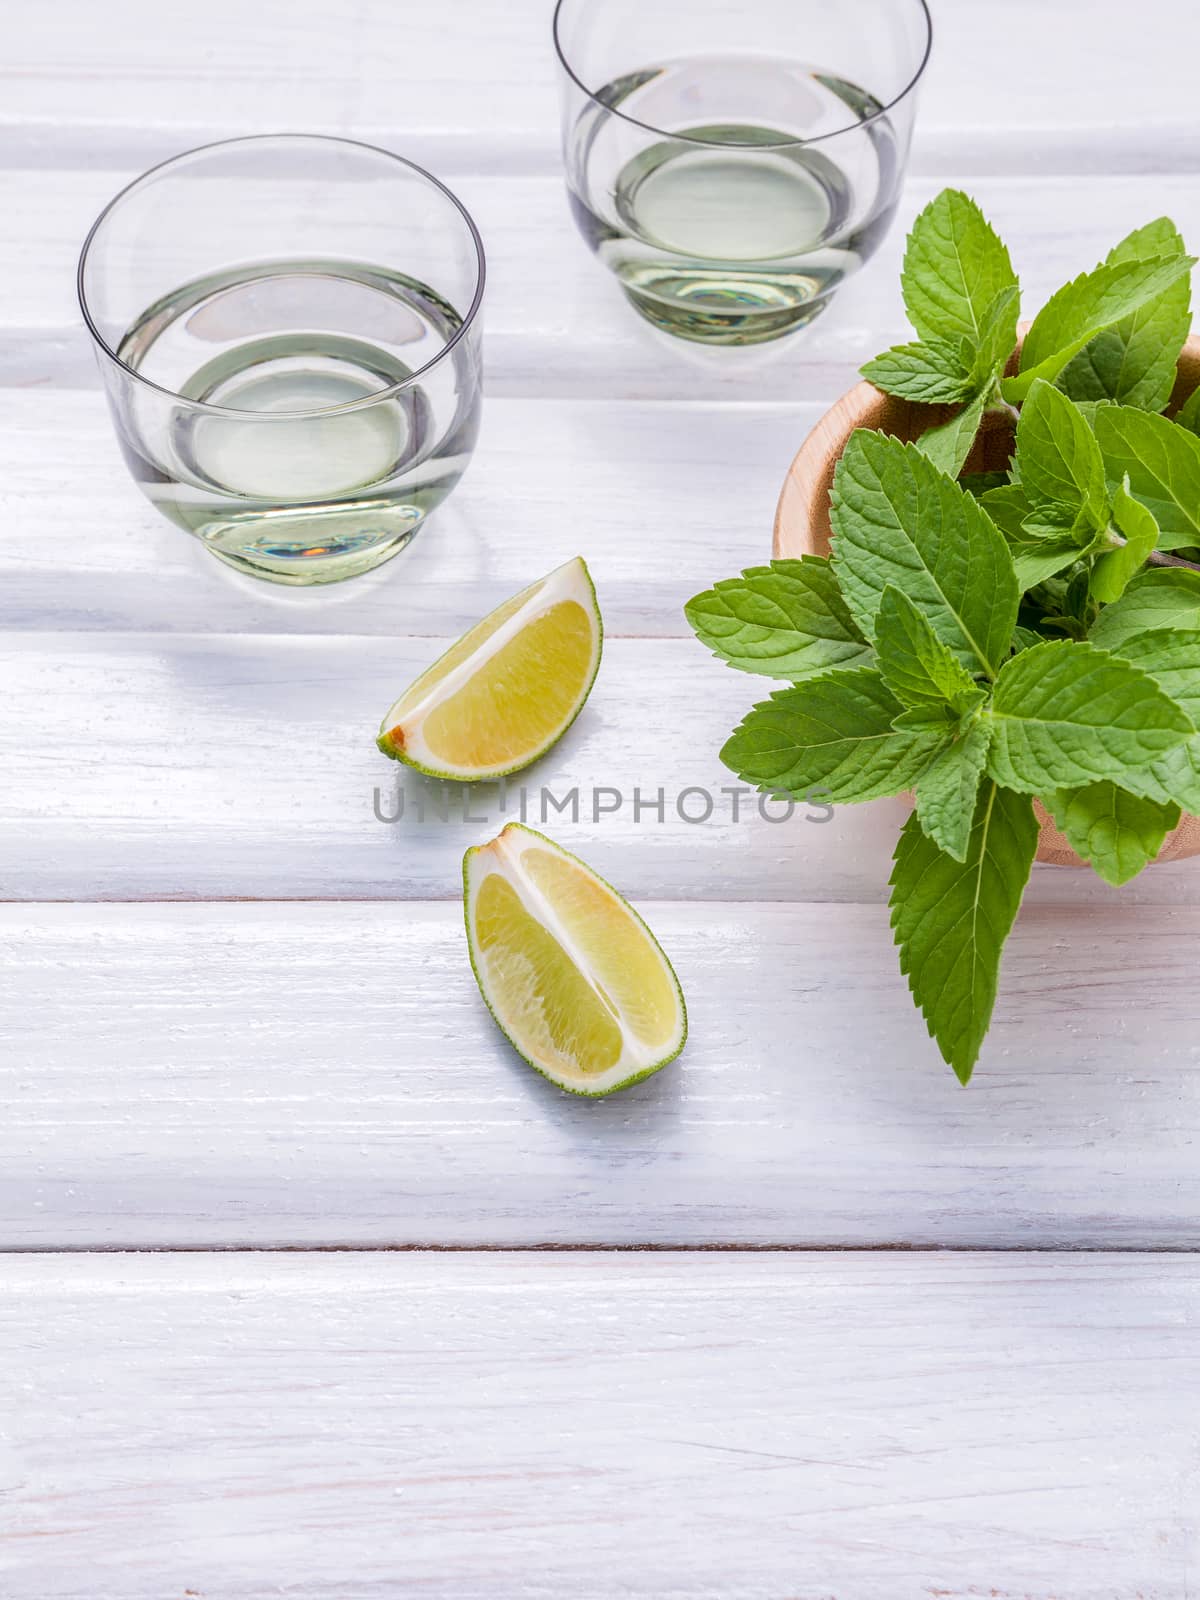 Ingredients for making mojitos mint leaves, lime,lemon and vodka on rustic background.